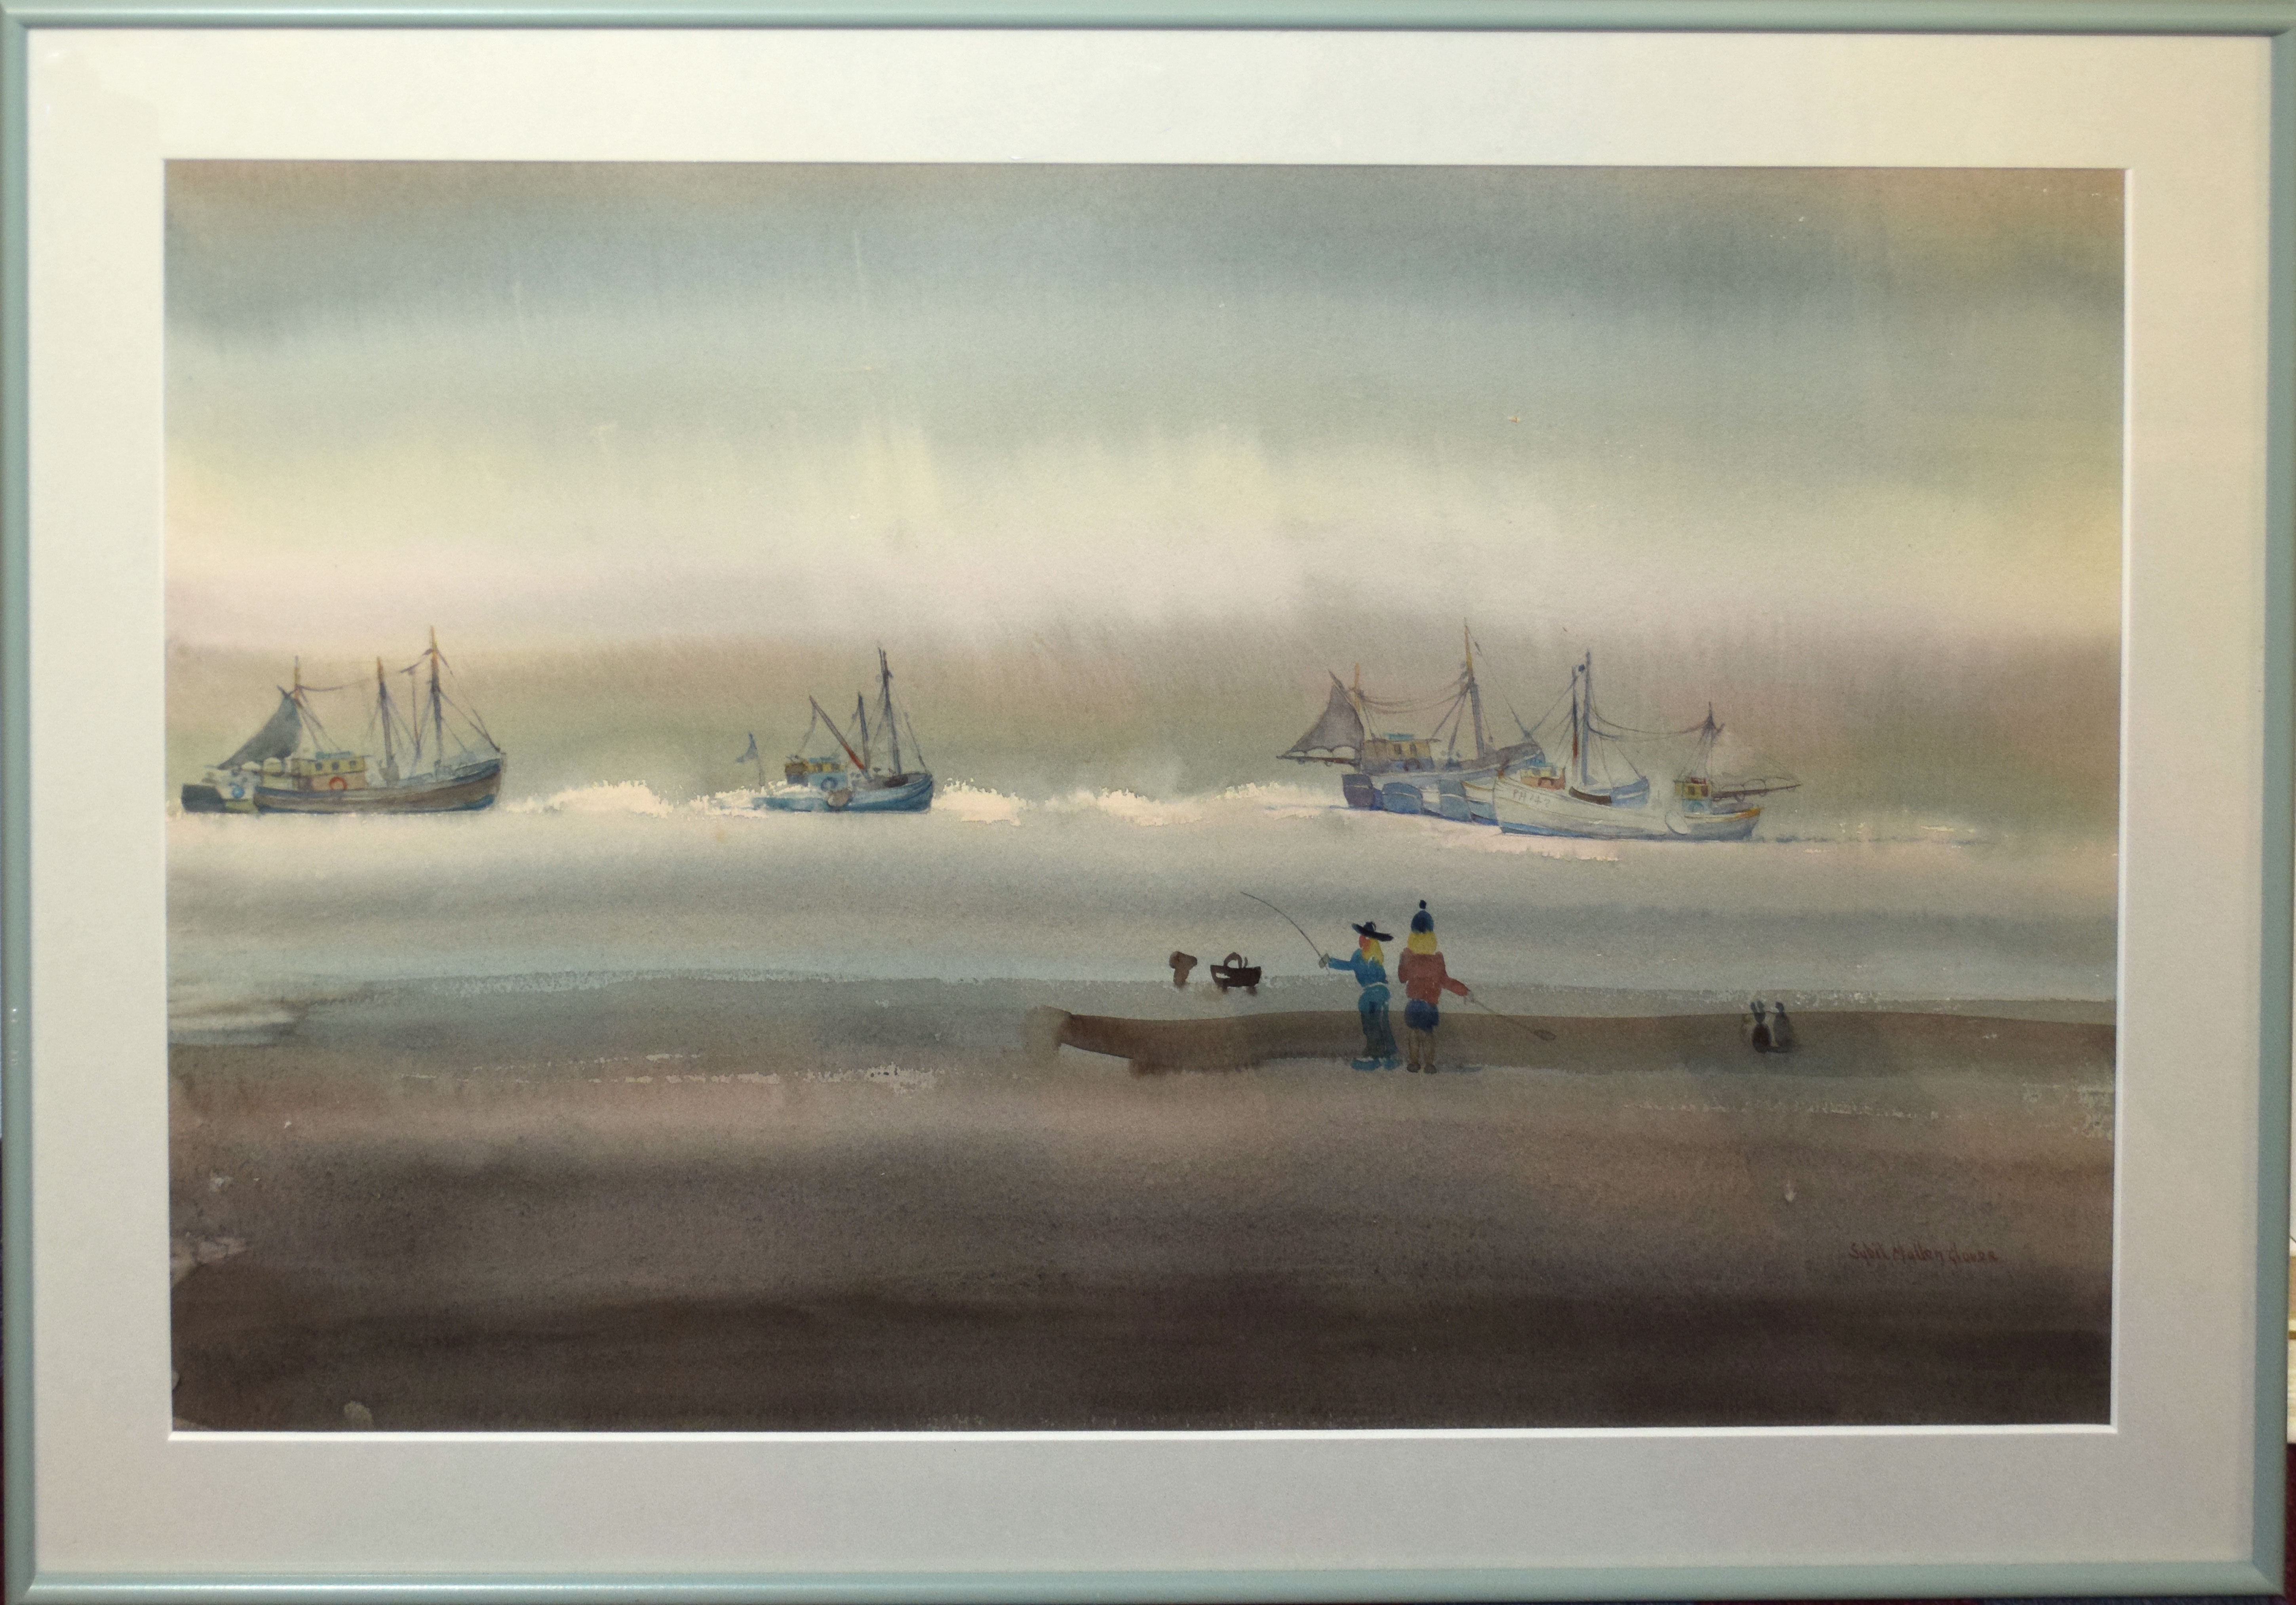 AR Sybil Mullen Glover (1908-1995), "Fishing on the beach", watercolour, signed lower right, 34 x